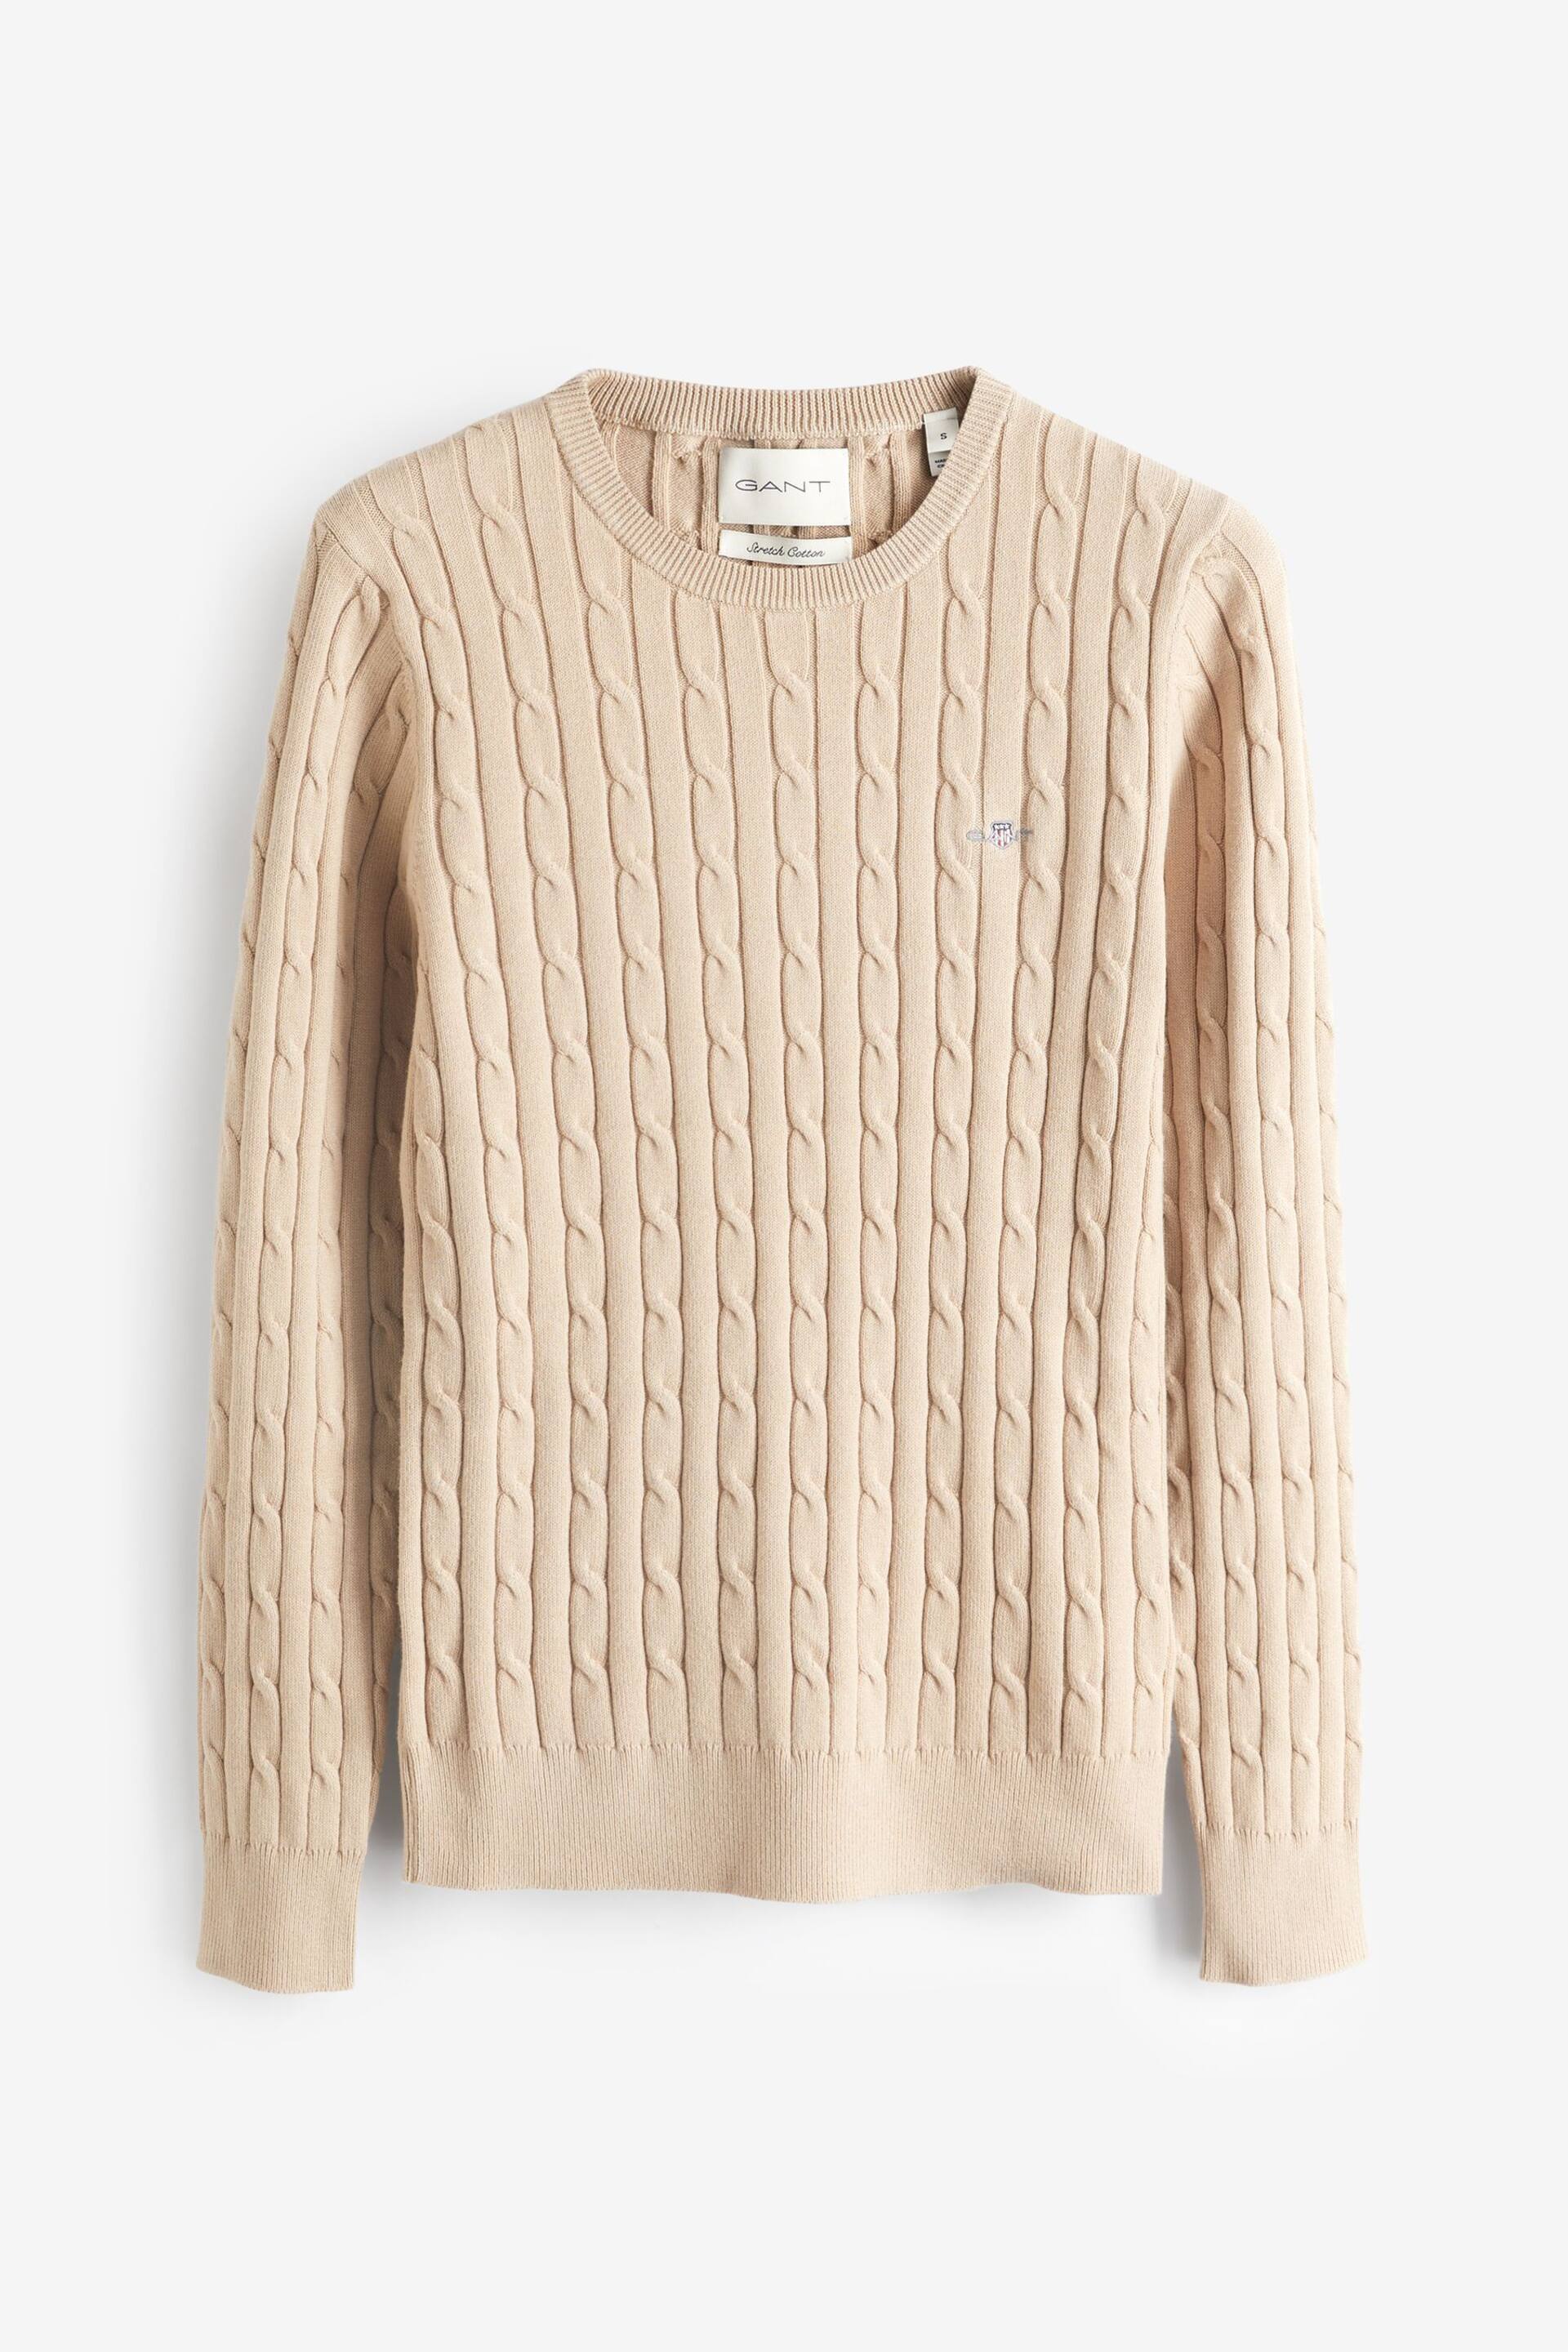 GANT Stretch Cotton Cable Knit Jumper - Image 5 of 5